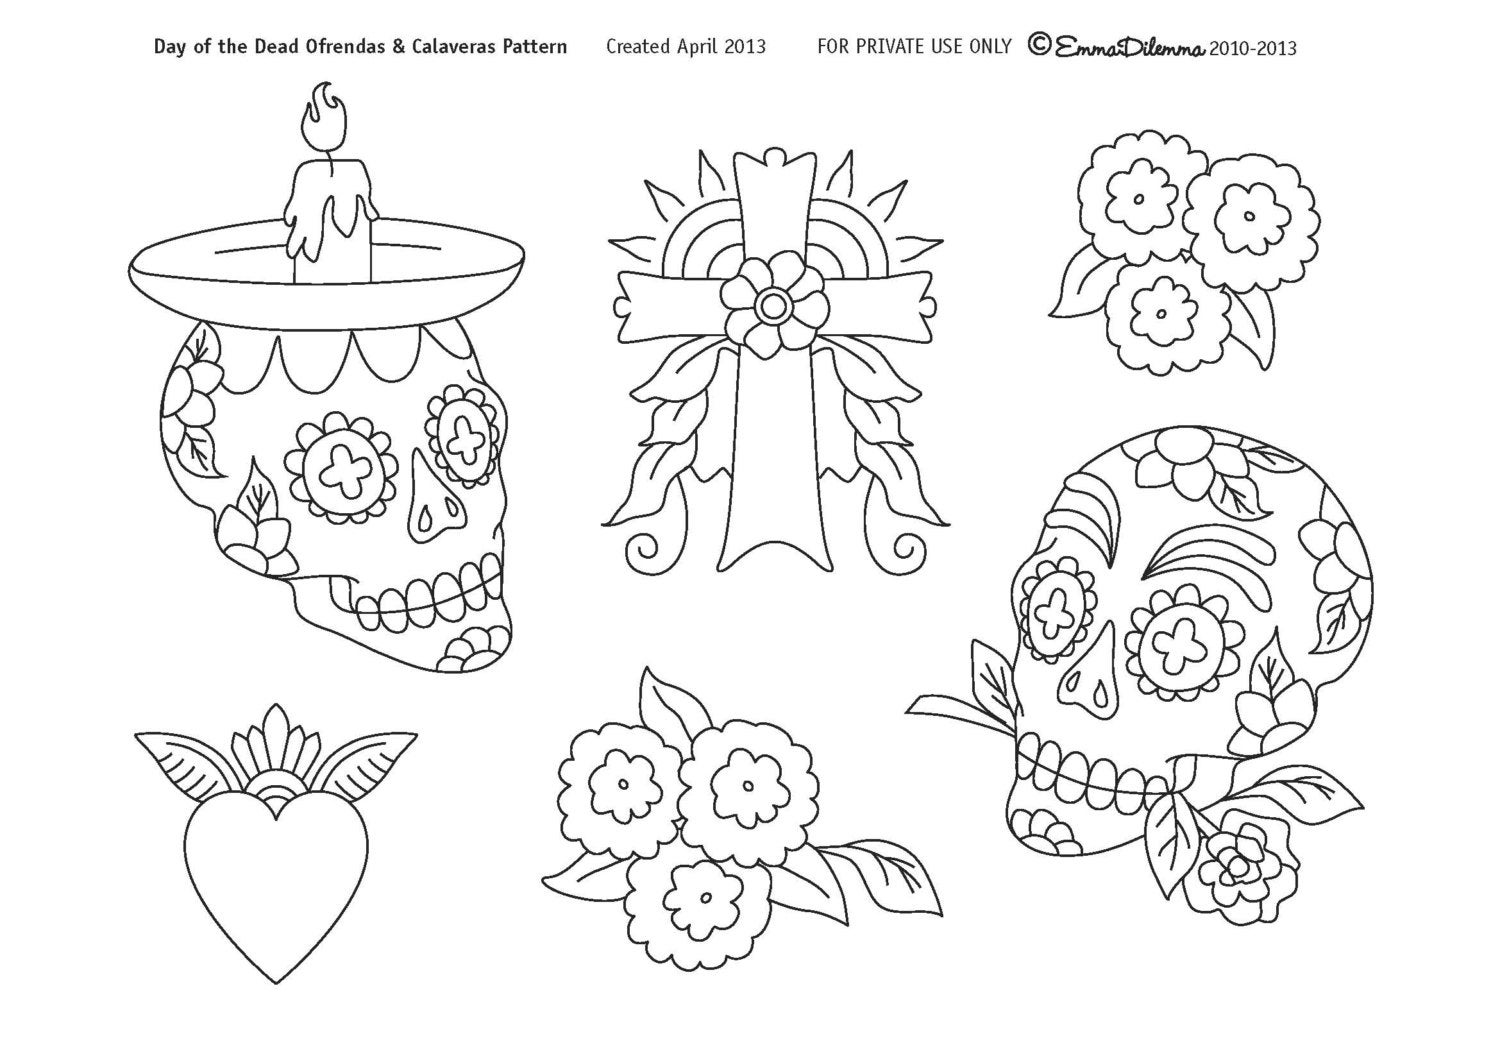 Day of the Dead Calaveras & Ofrendas Pattern pdf file for Hand